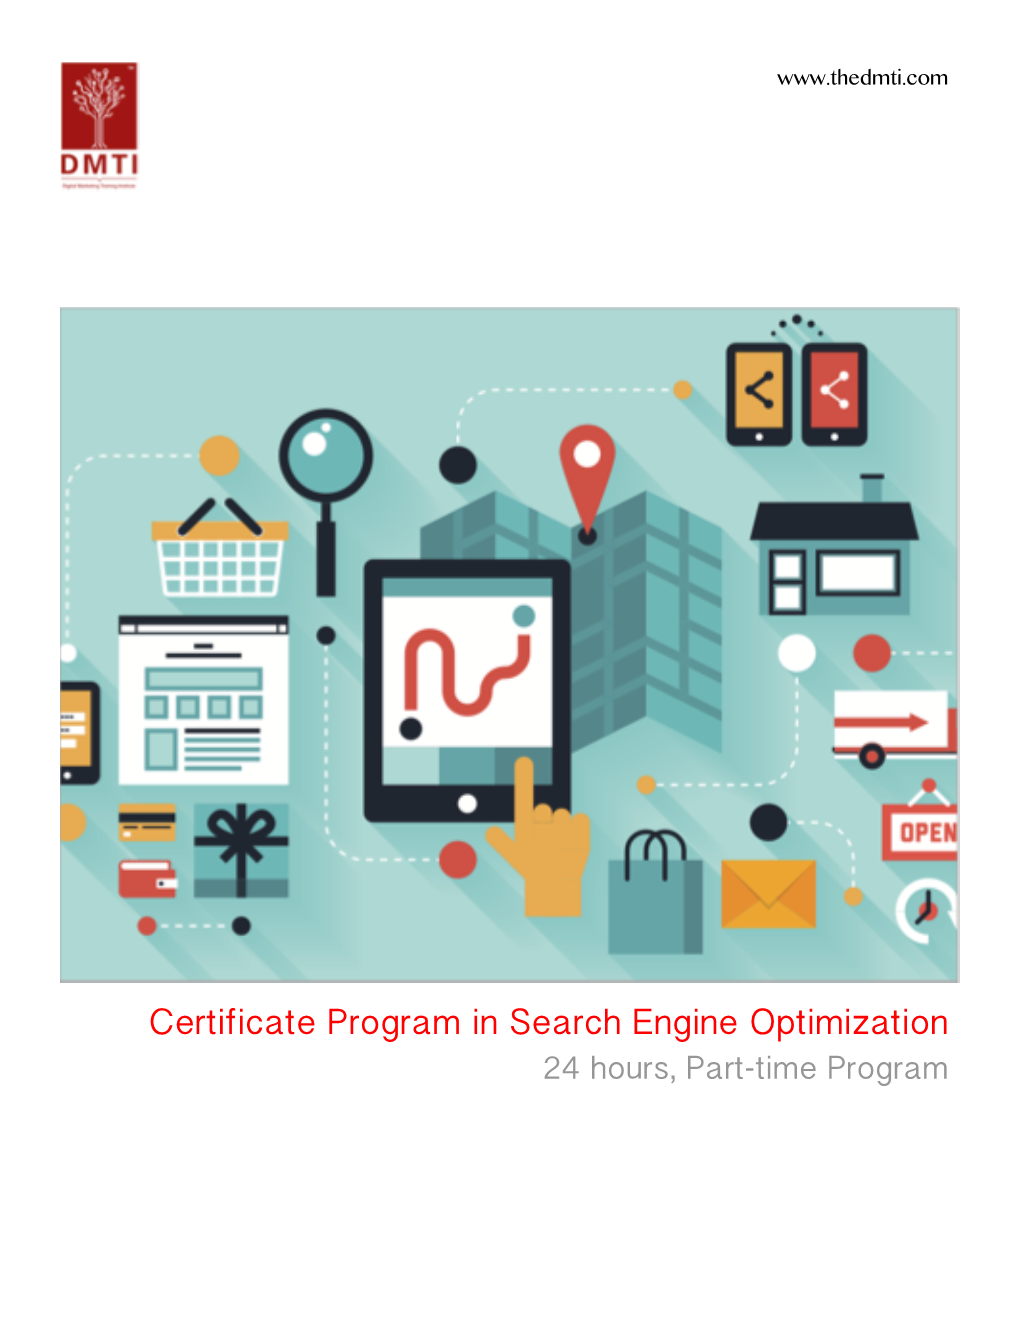 Certificate Program in Search Engine Optimization 24 Hours, Part-Time Program